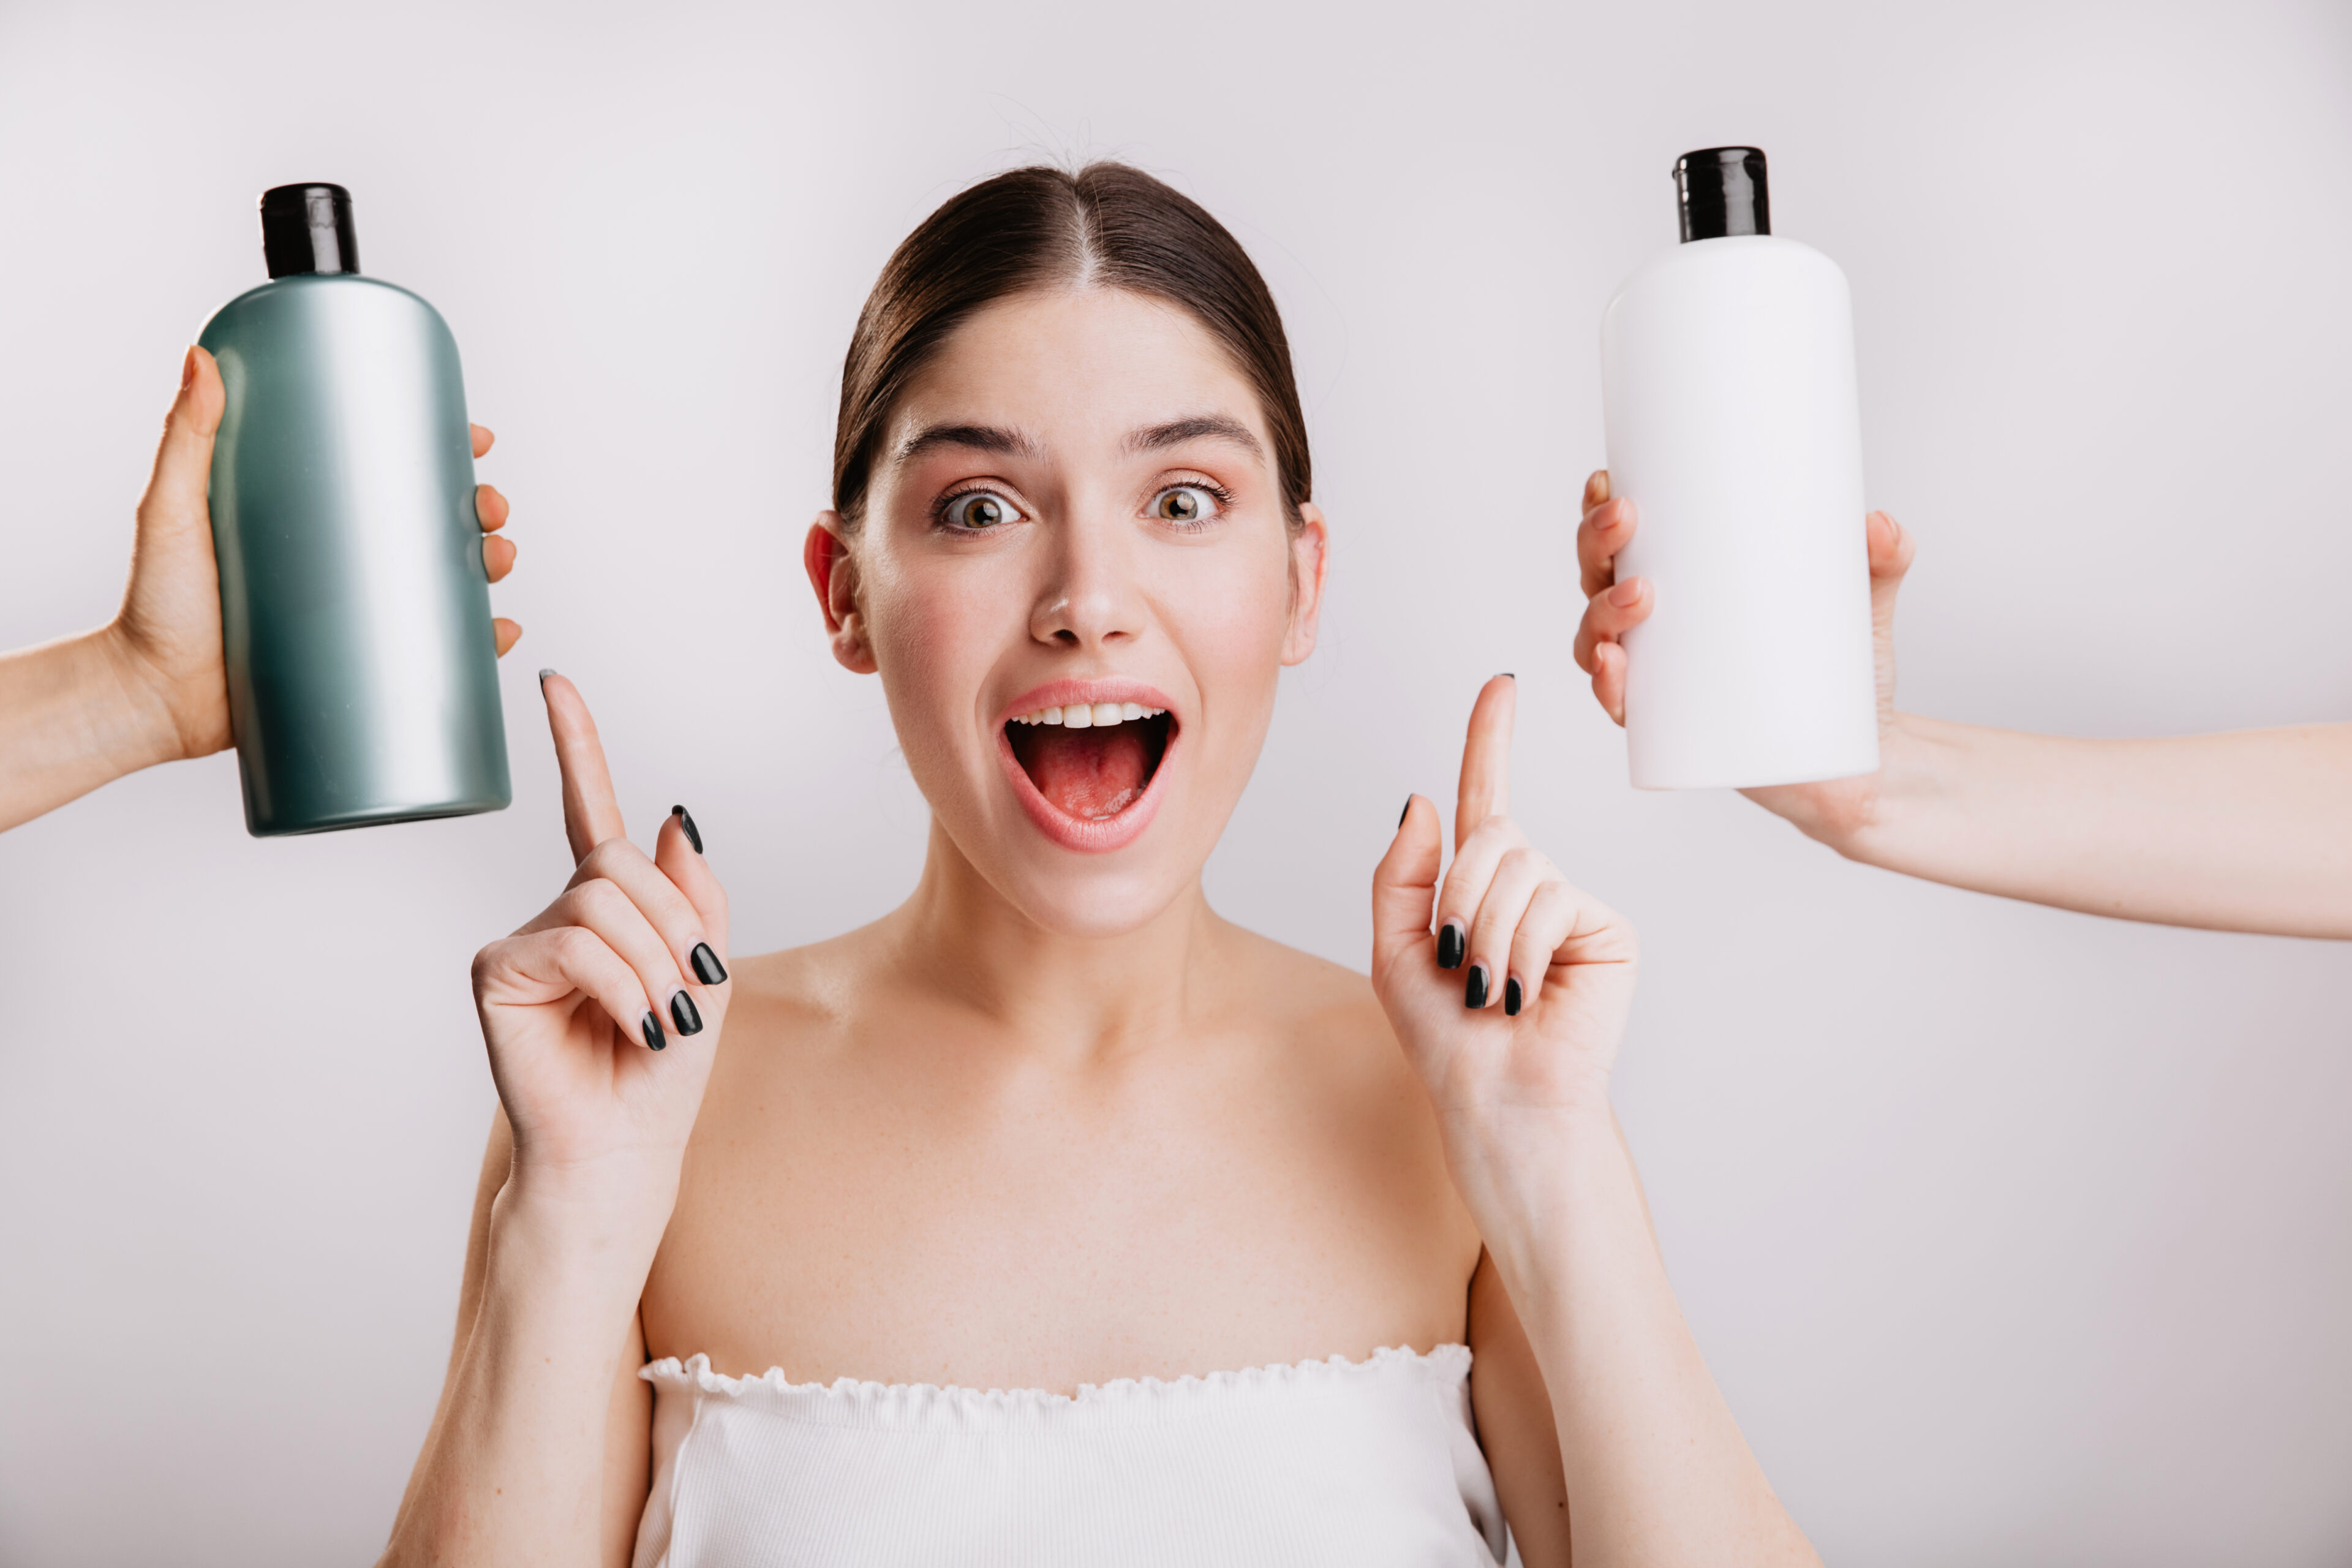 Opt for a gentle shampoo or co-wash (conditioner wash)